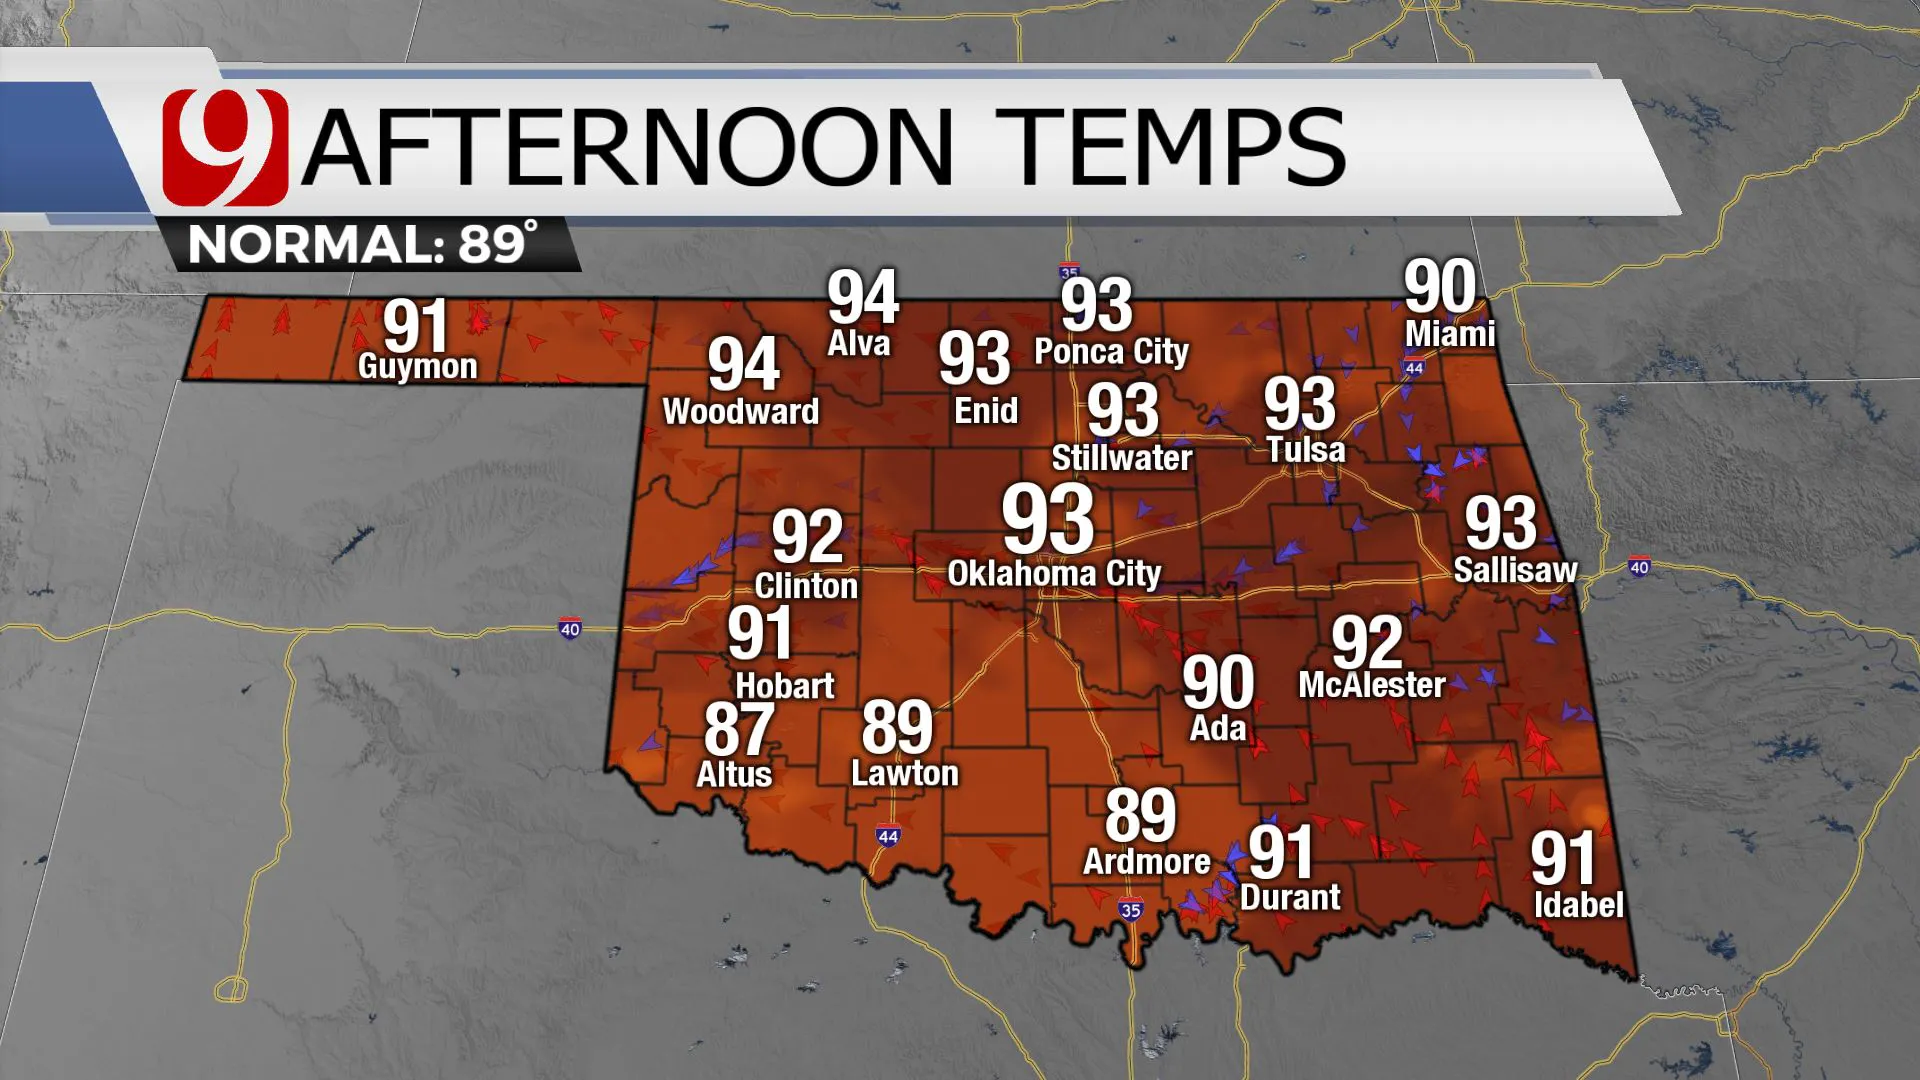 Afternoon temps across the state.